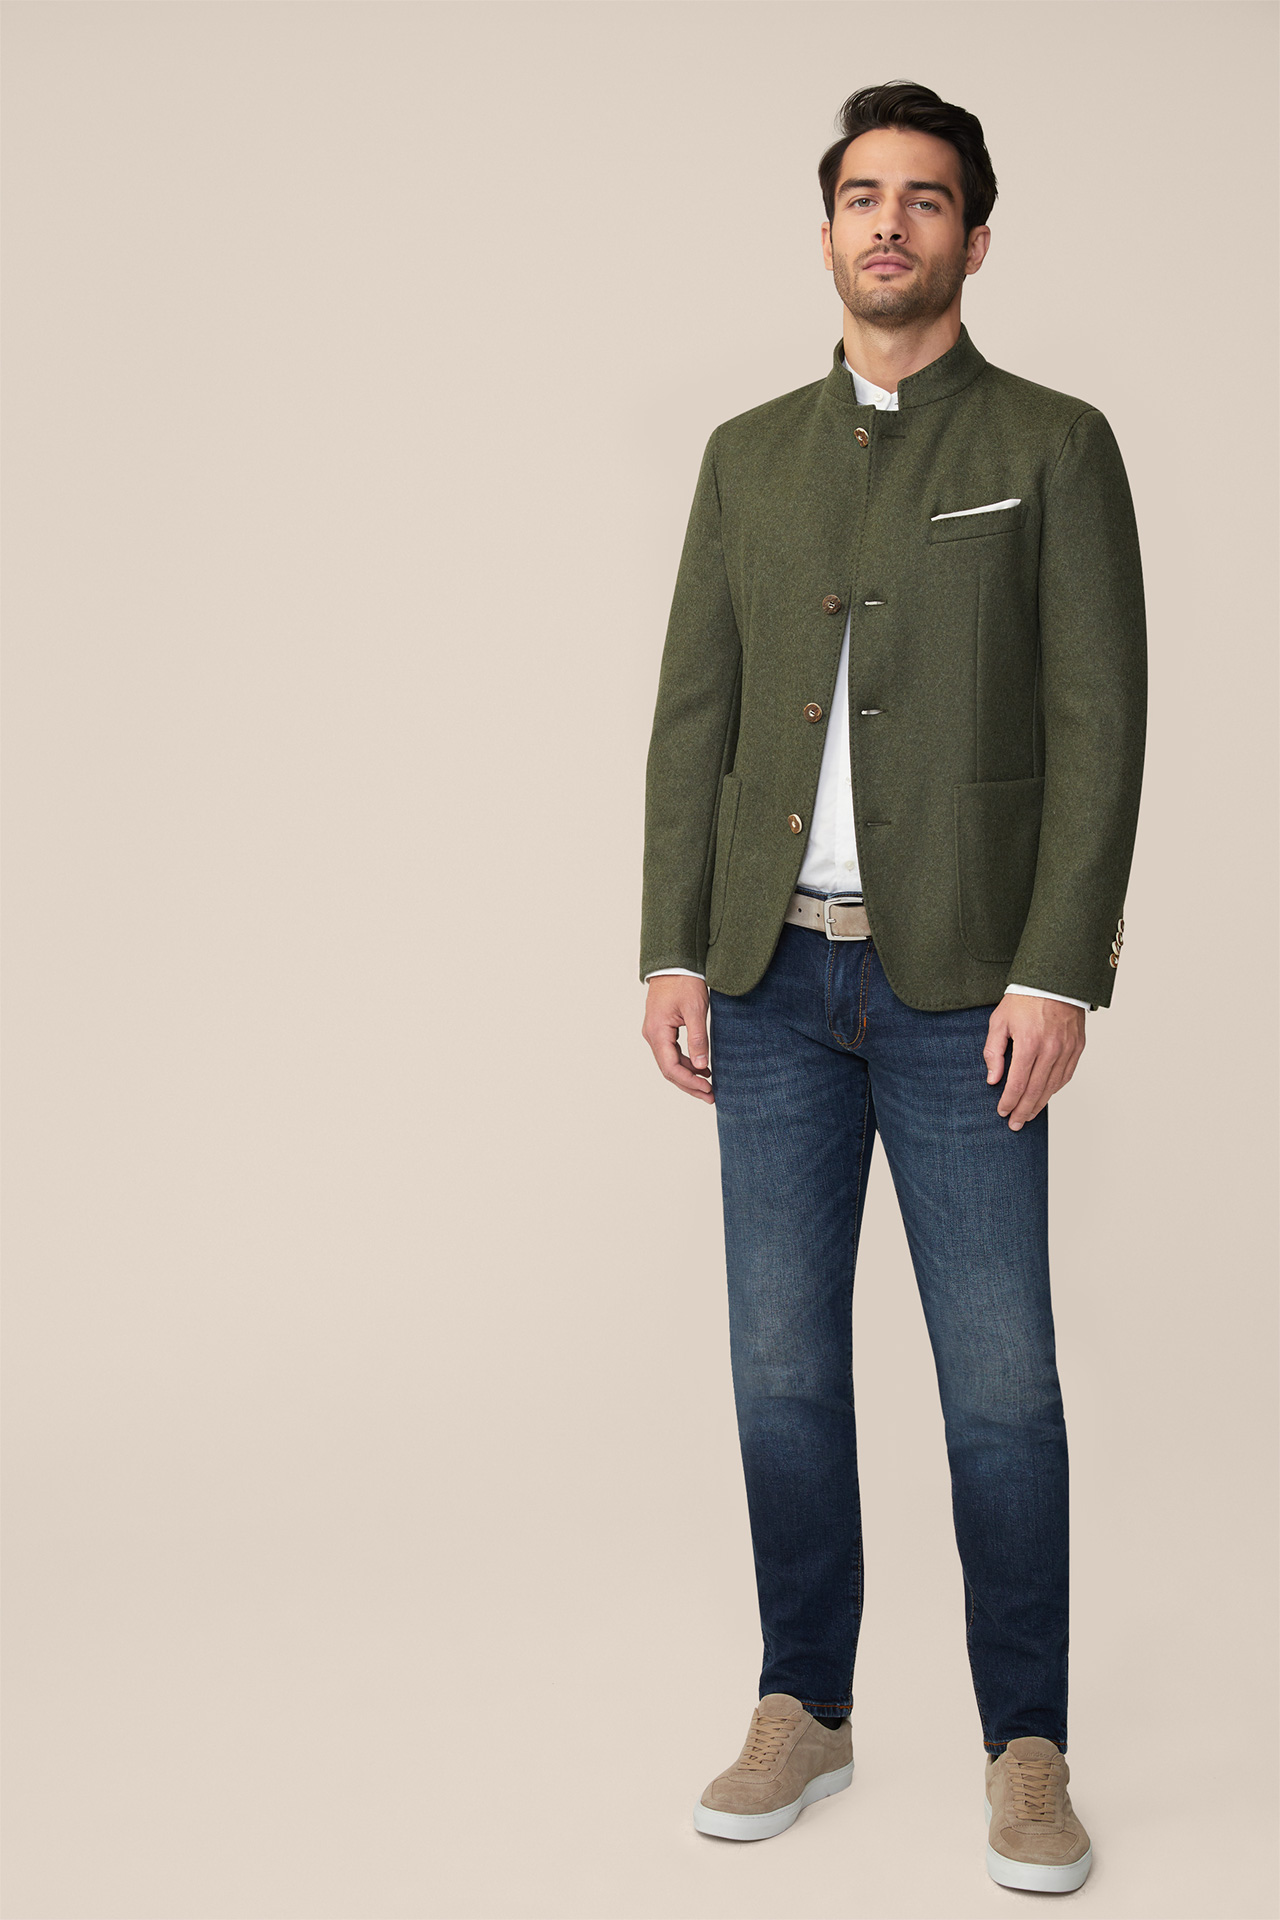 Altro Jacket with Stand-up Collar in Medium Green